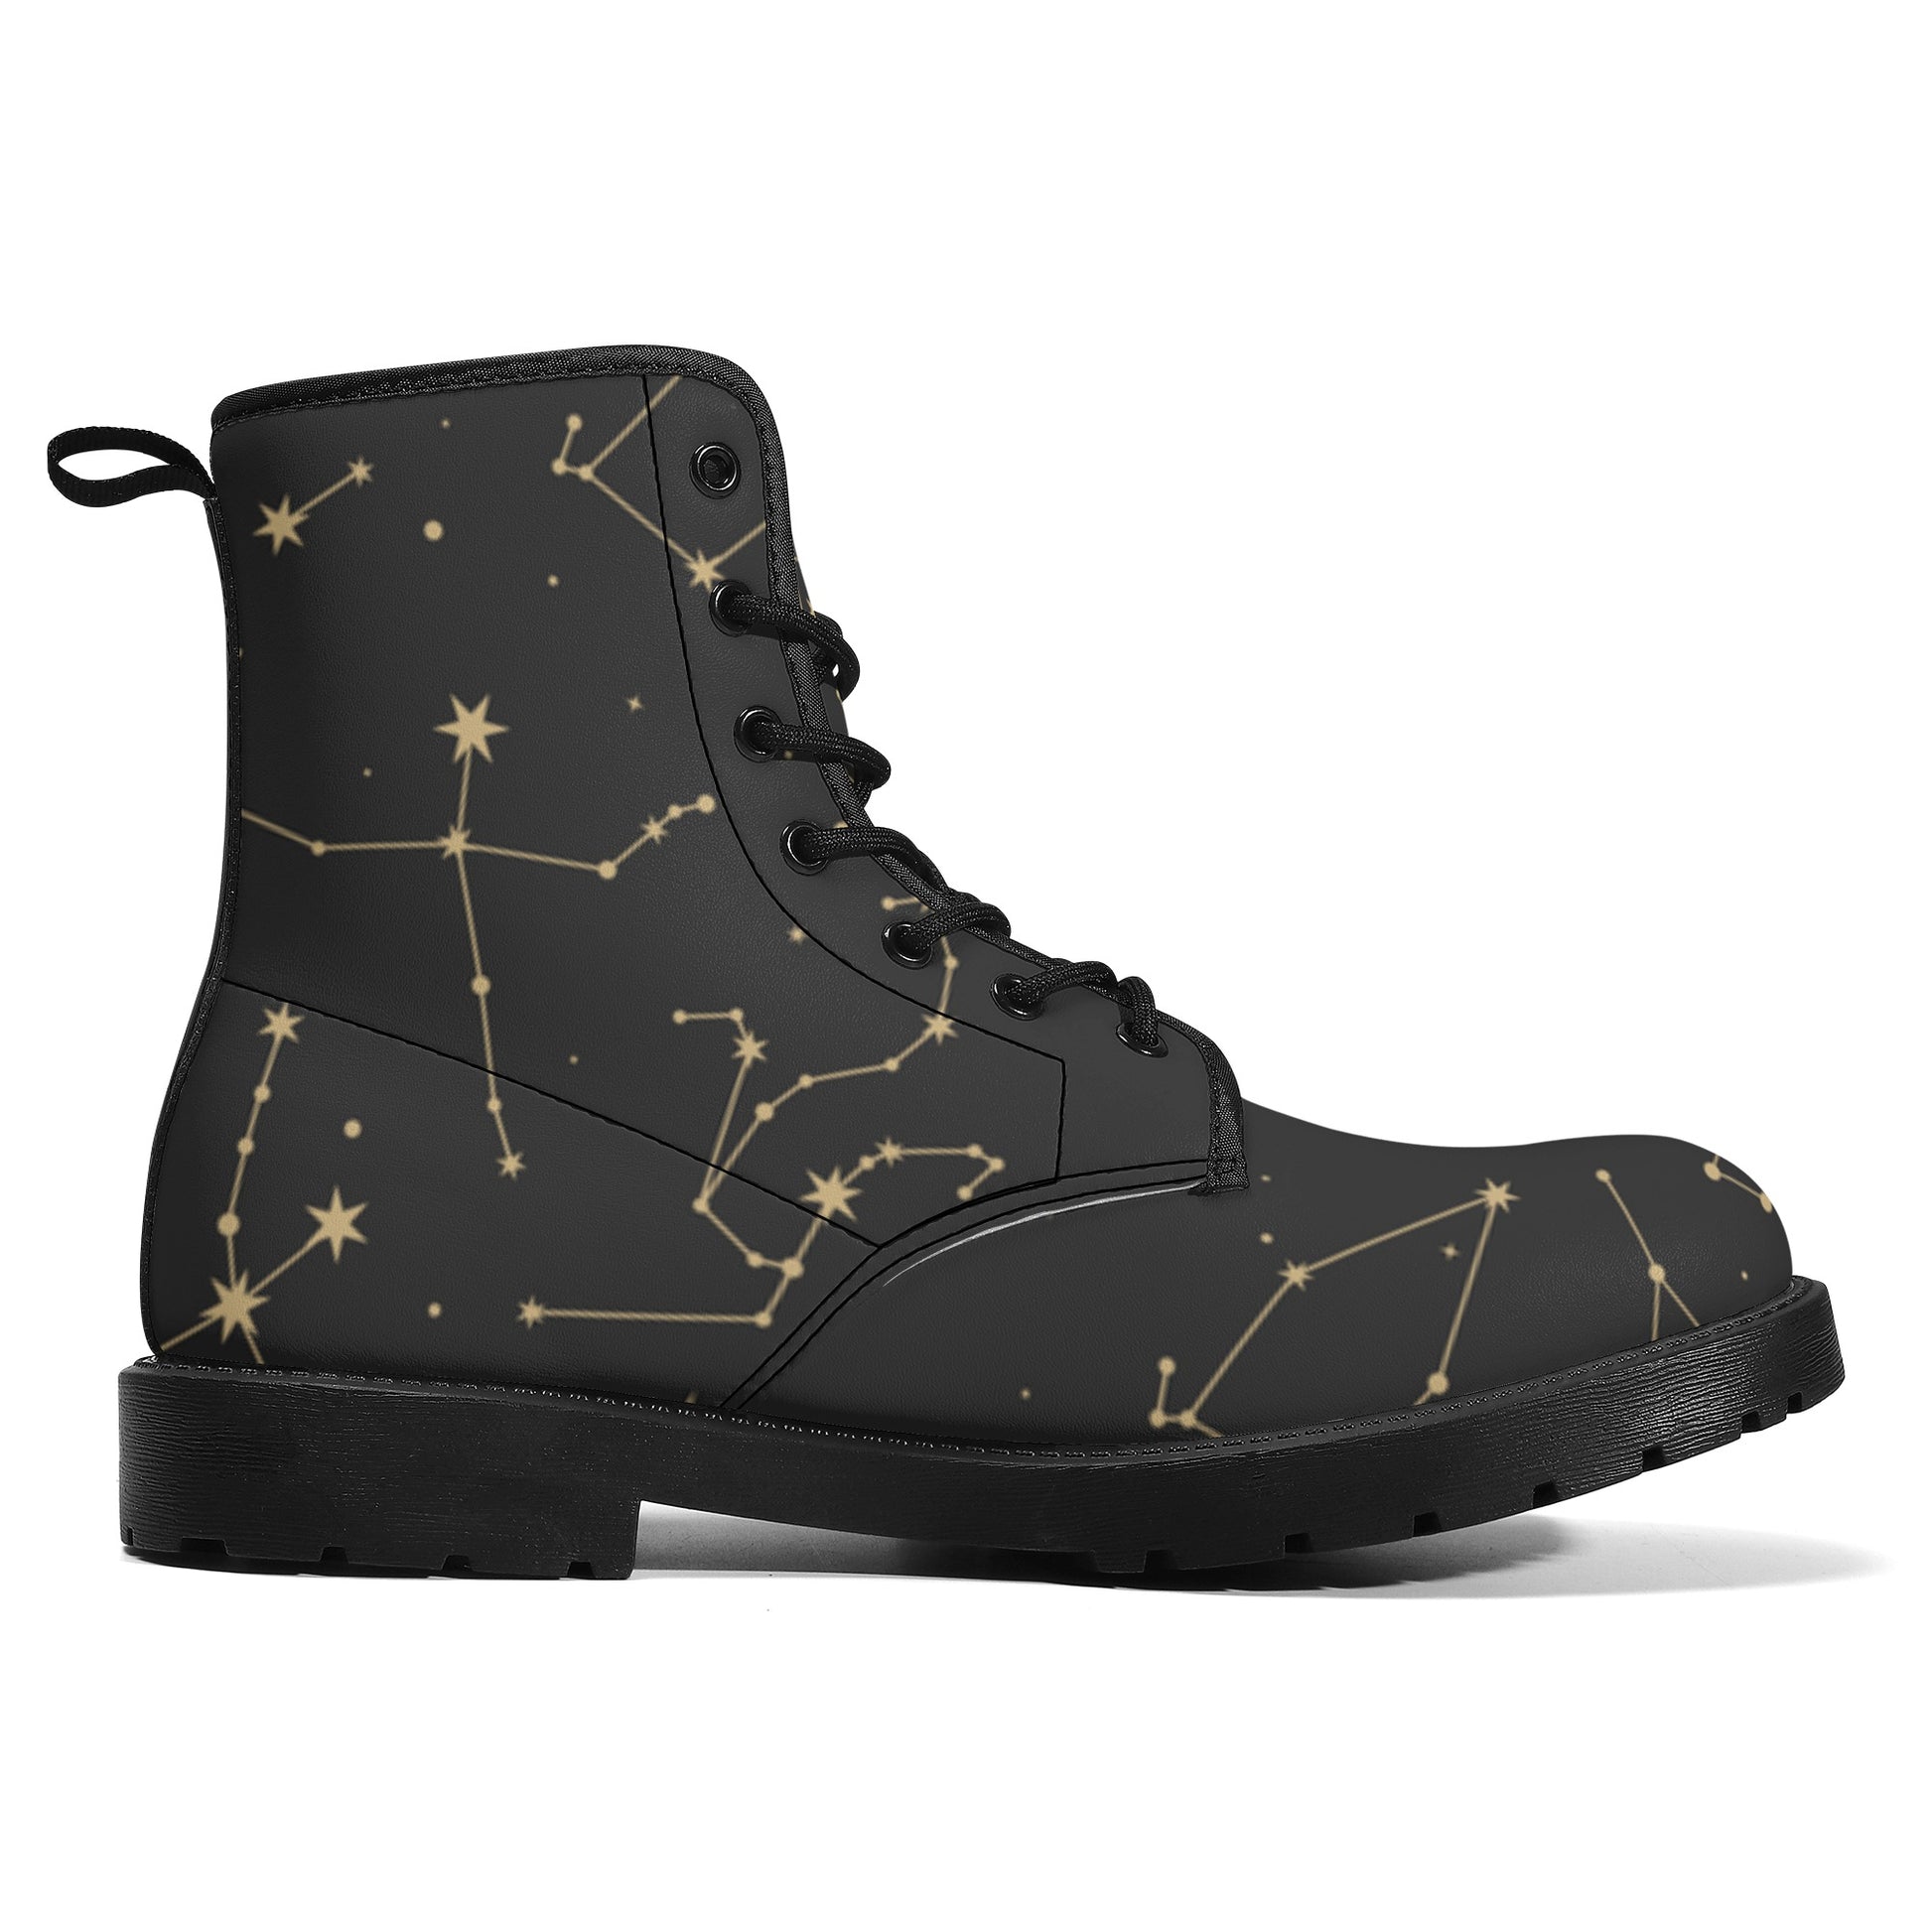 Constellation Women Leather Boots, Stars Space Vegan Lace Up Shoes Hiking Festival Black Ankle Combat Work Winter Waterproof Custom Ladies Starcove Fashion